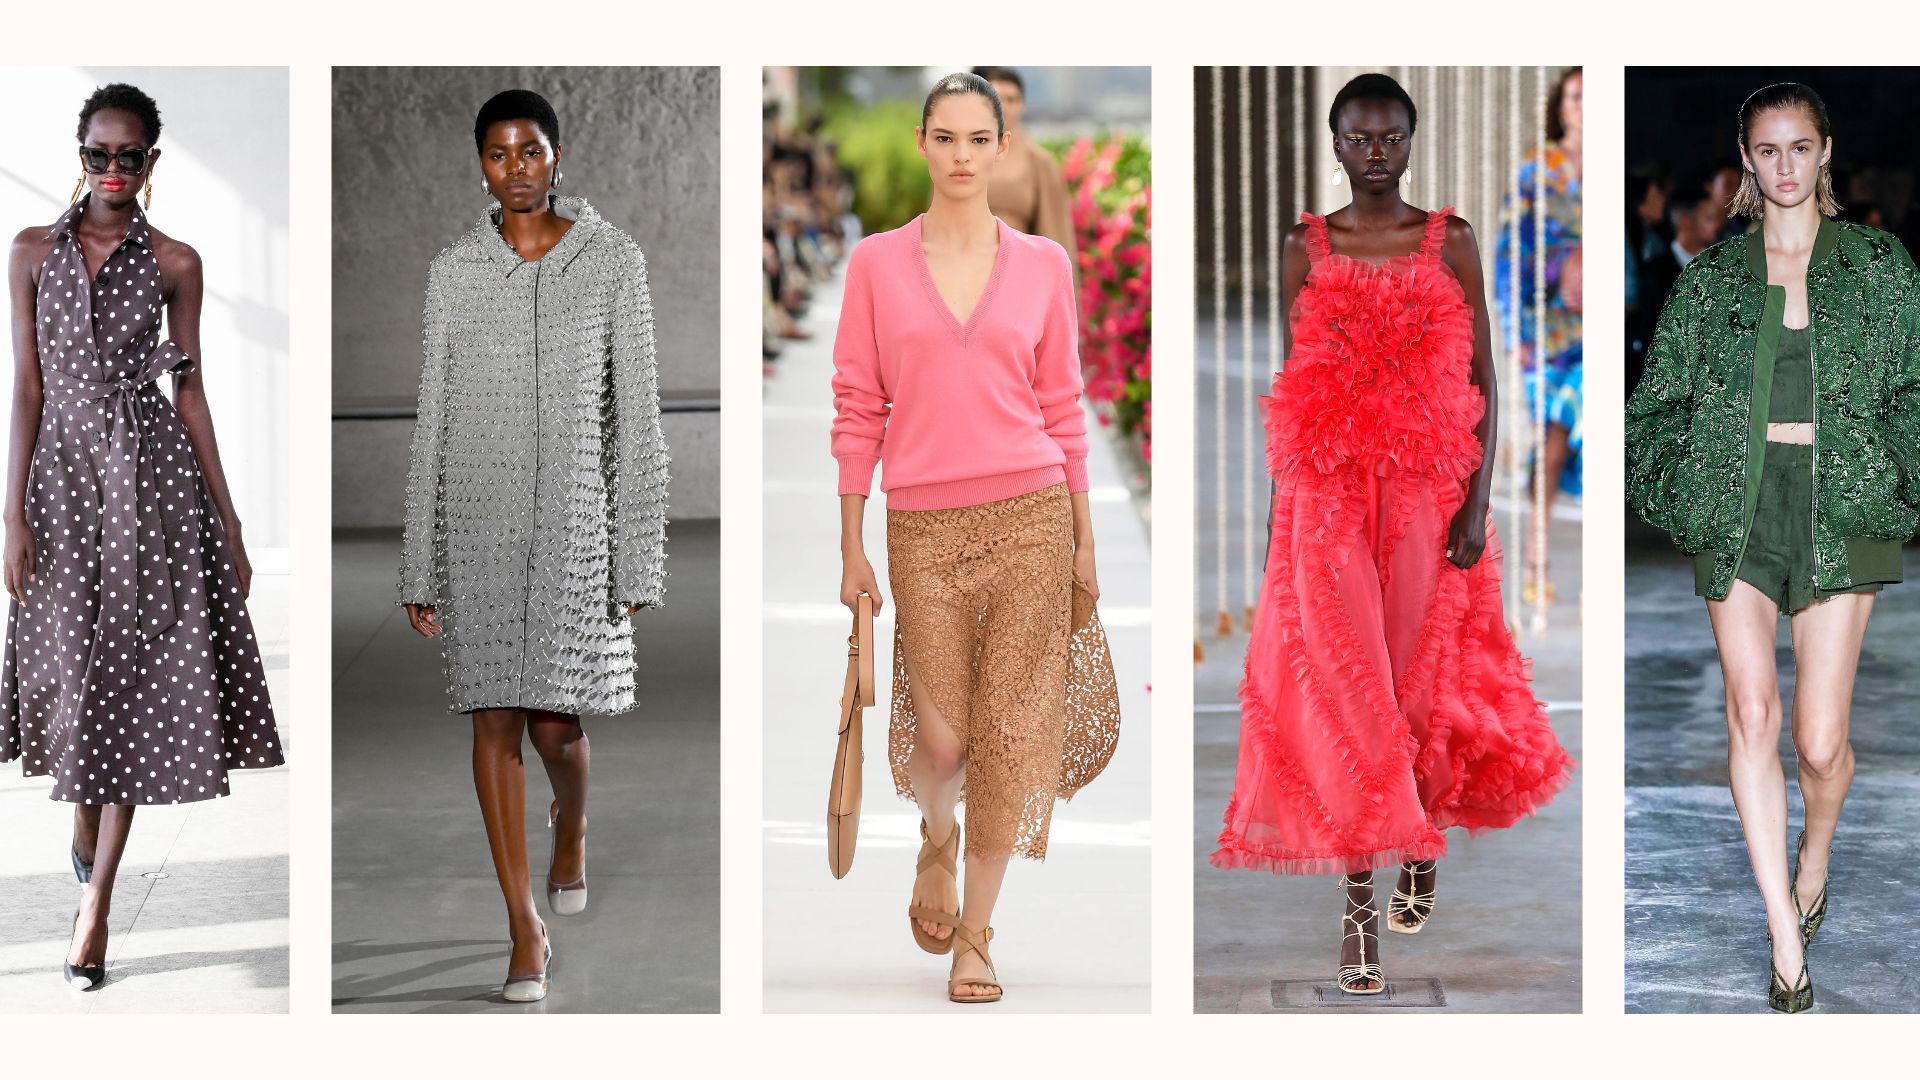 7 Trending Fashion Designers from NYFW - Shades of Pinck